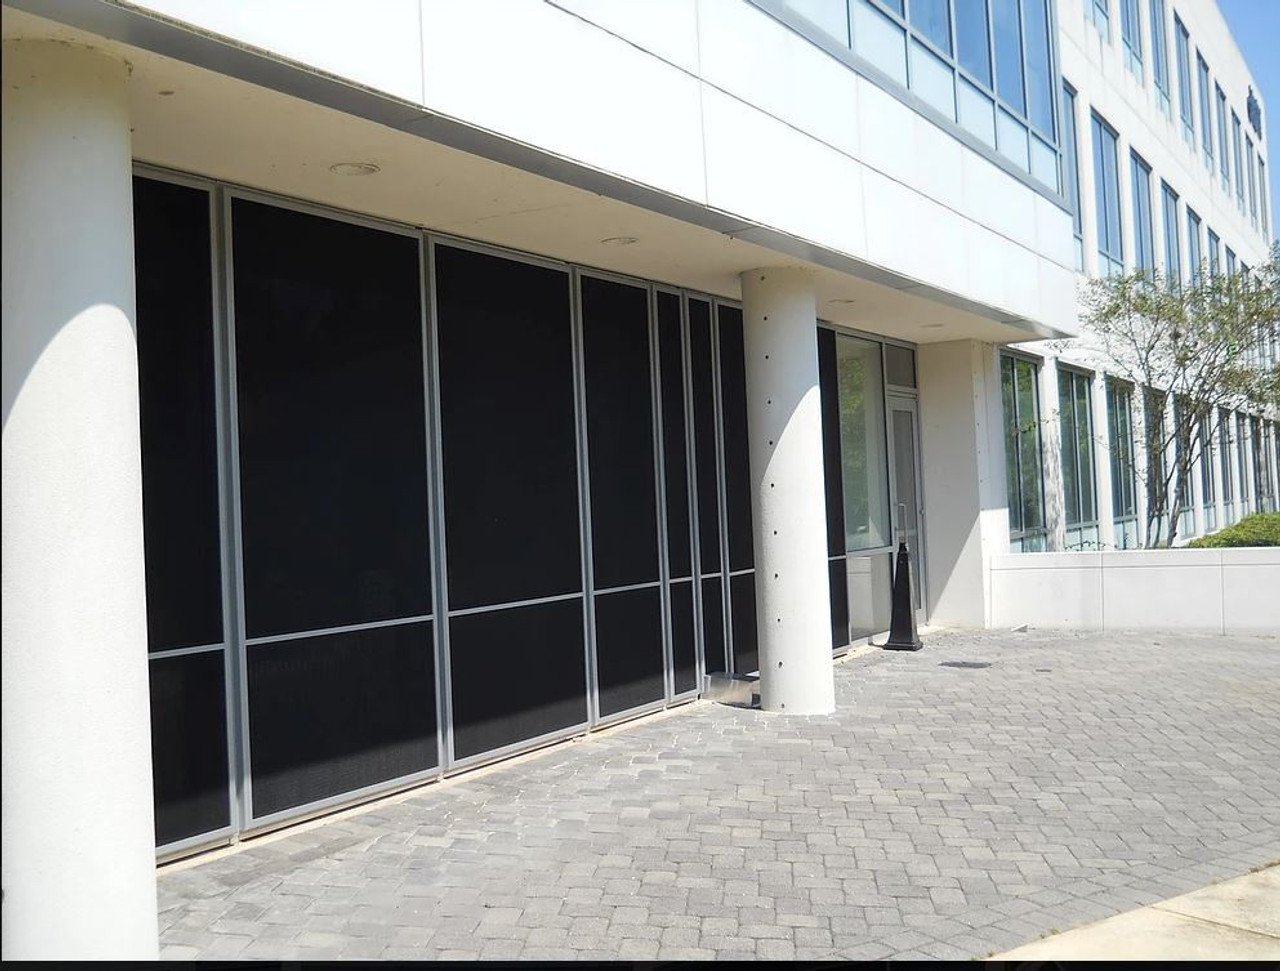 Commercial Security Screens